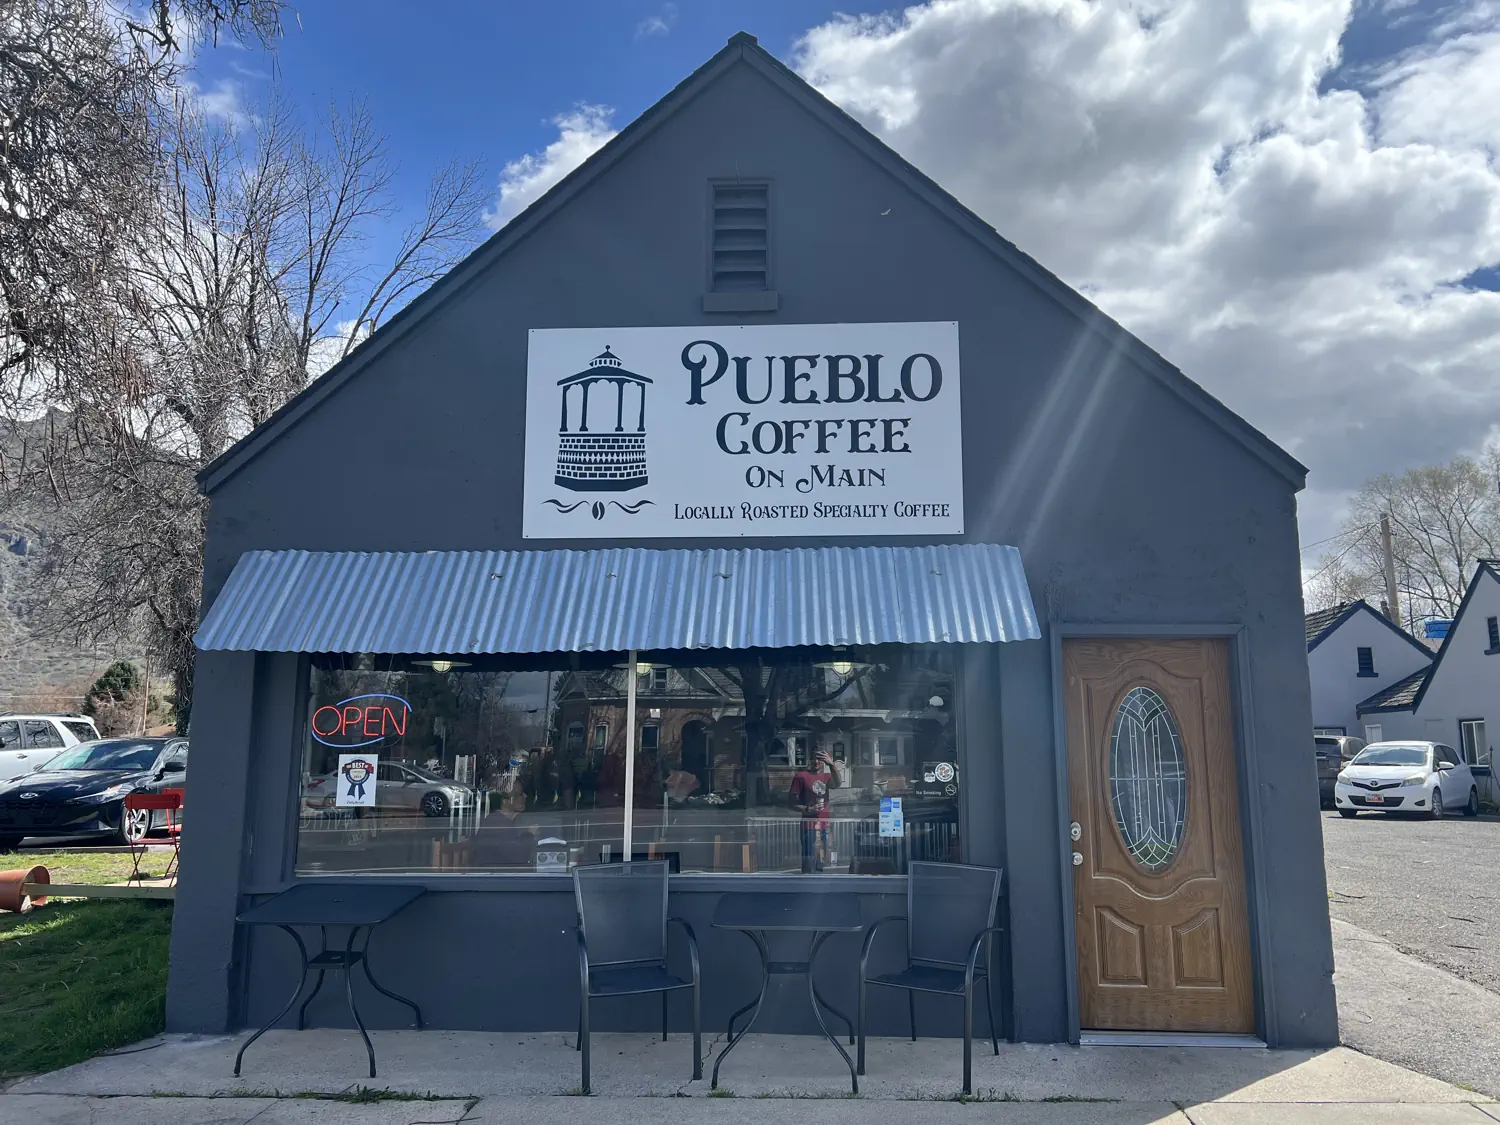 The Pueblo Coffee on Main storefront.